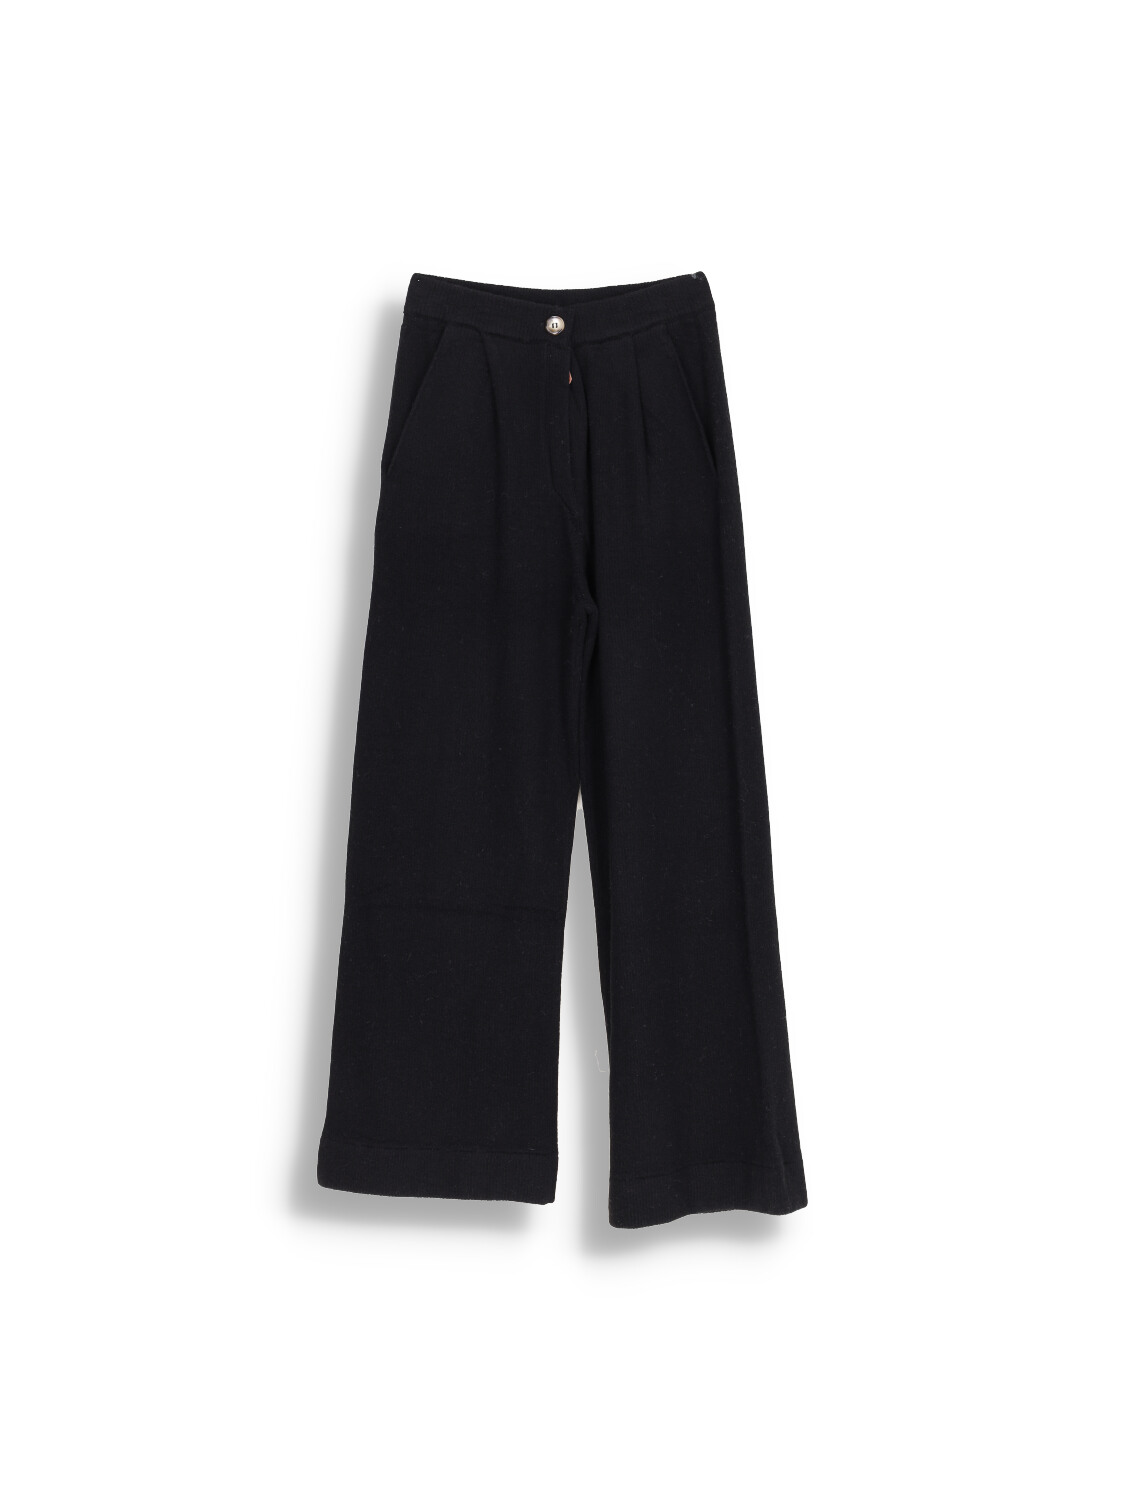 Wide leg pants with elastic waistband made of wool